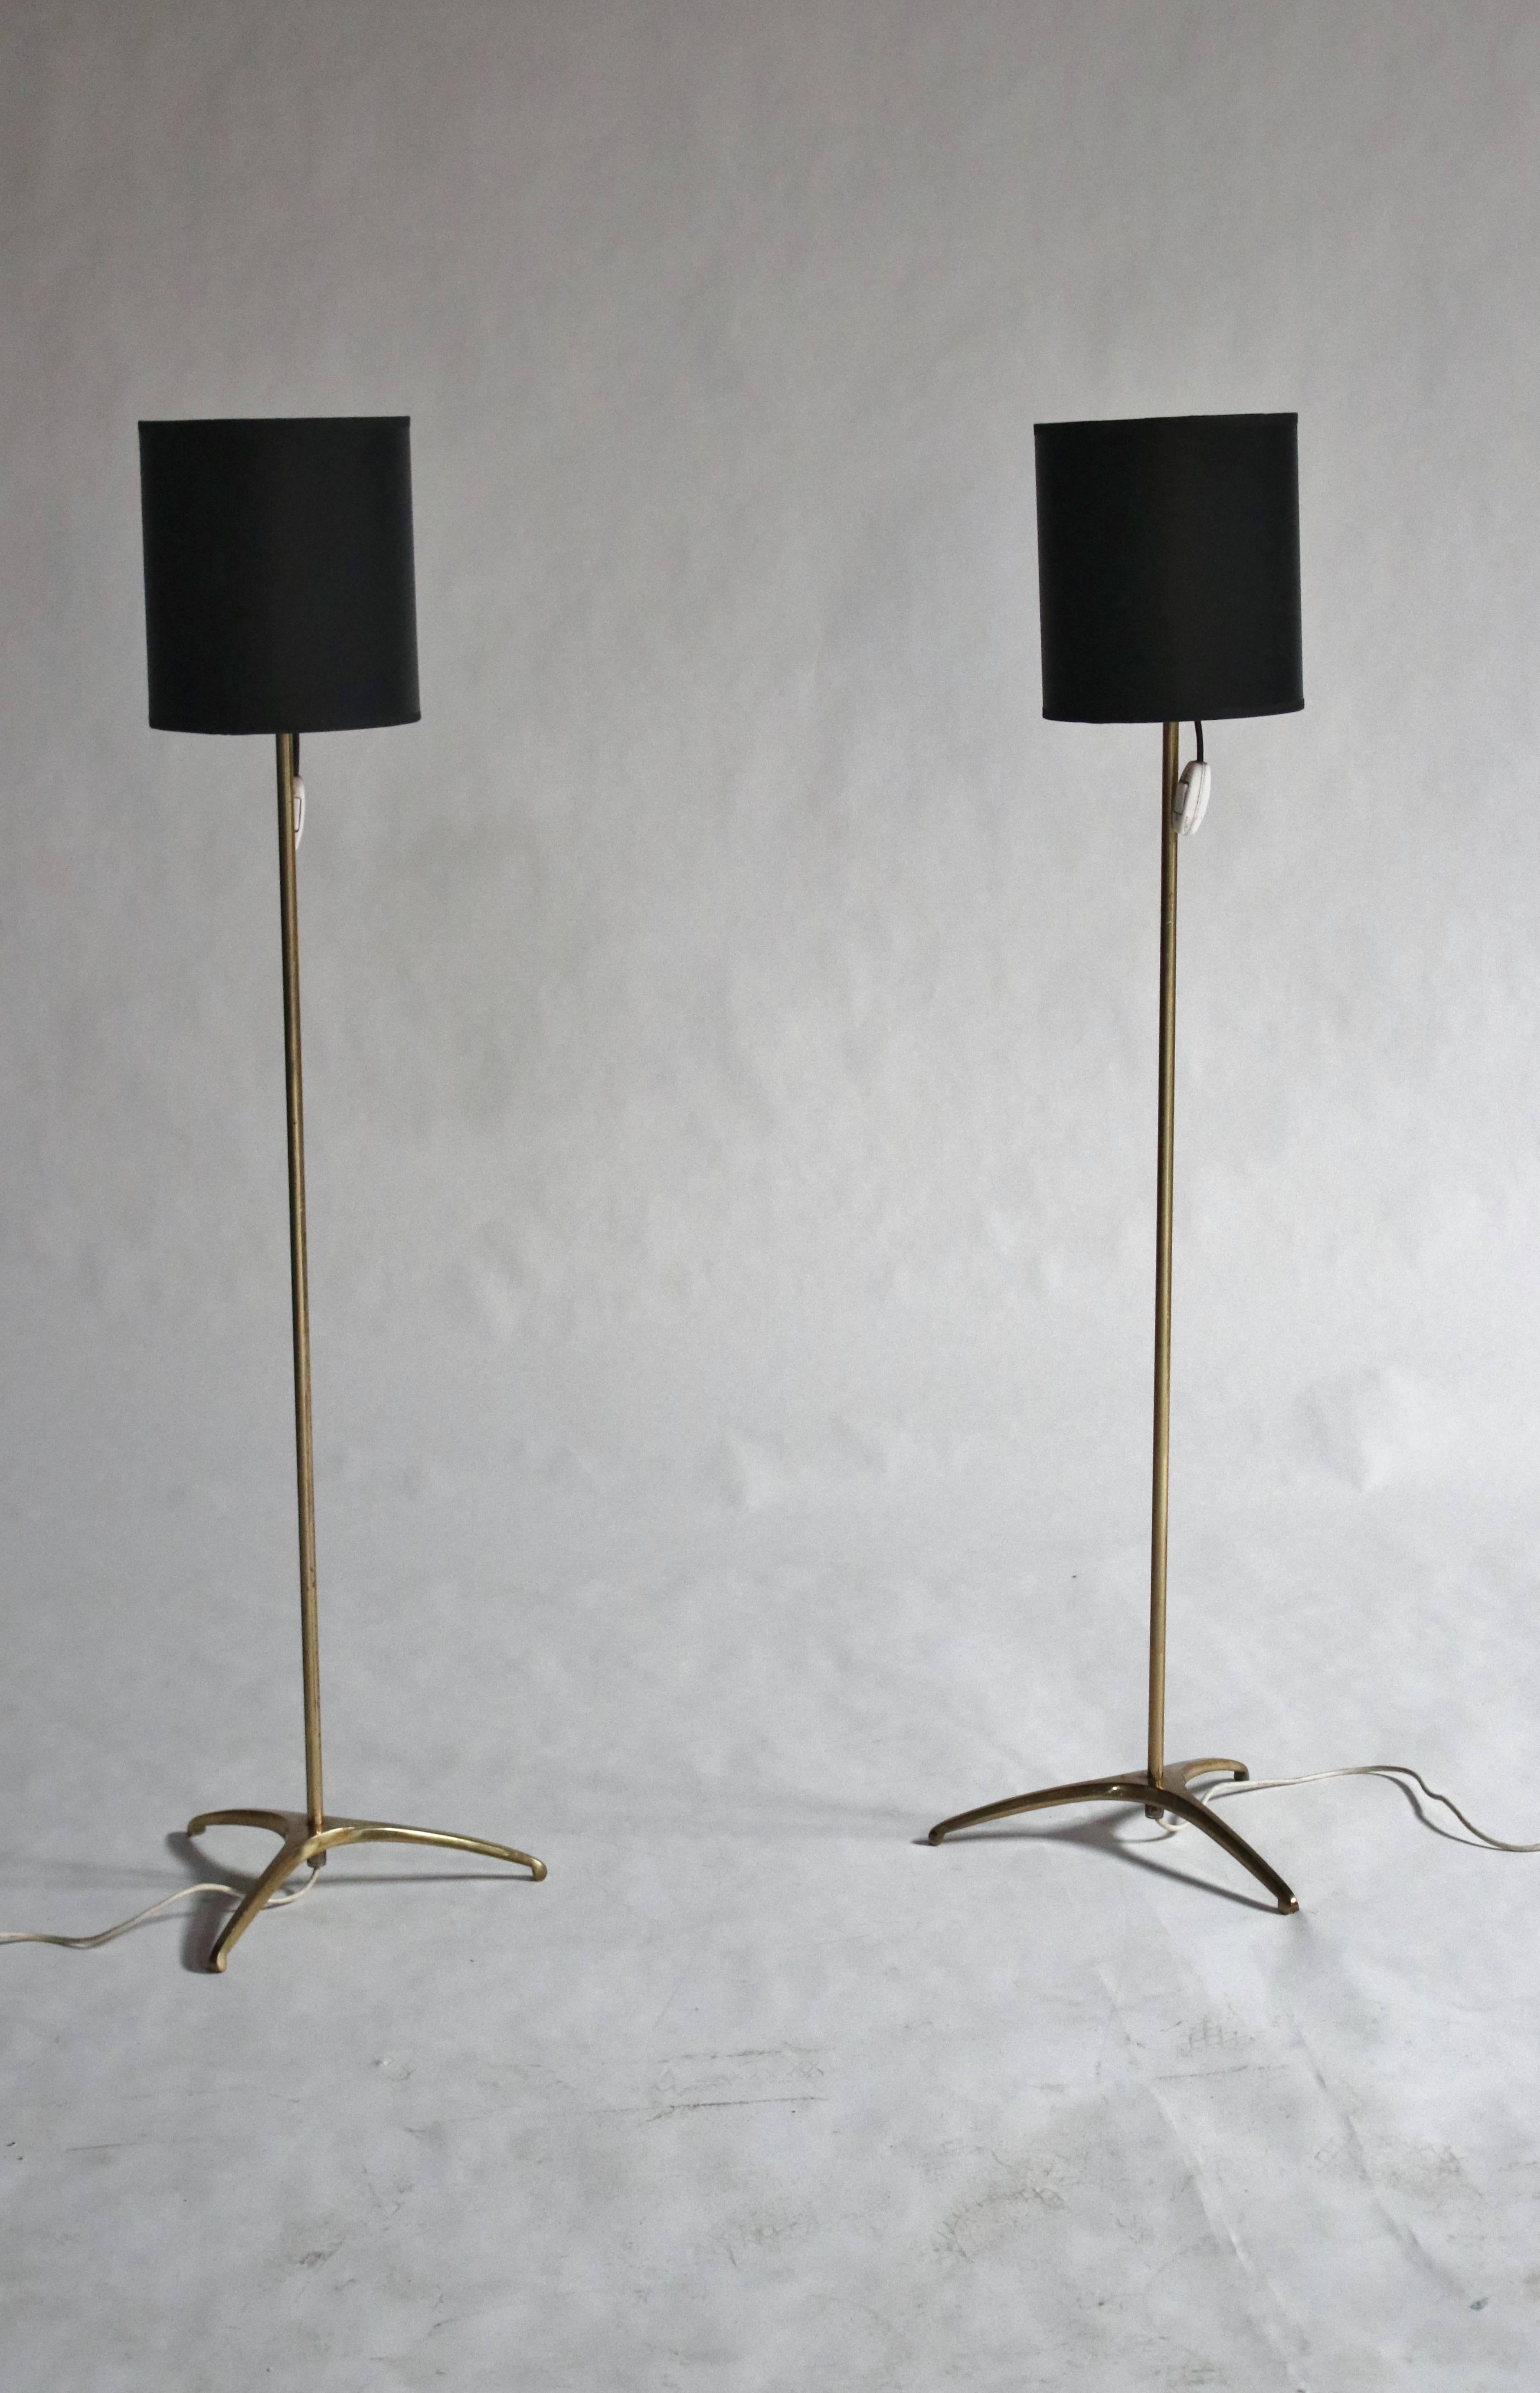 Pair of midcentury minimalist brass floor lamps by Svend Aage Sorenson with new custom black shades.Original European electric plug and equipped with US adapter. In working condition for both Euro and US outlets. Shades measure 8